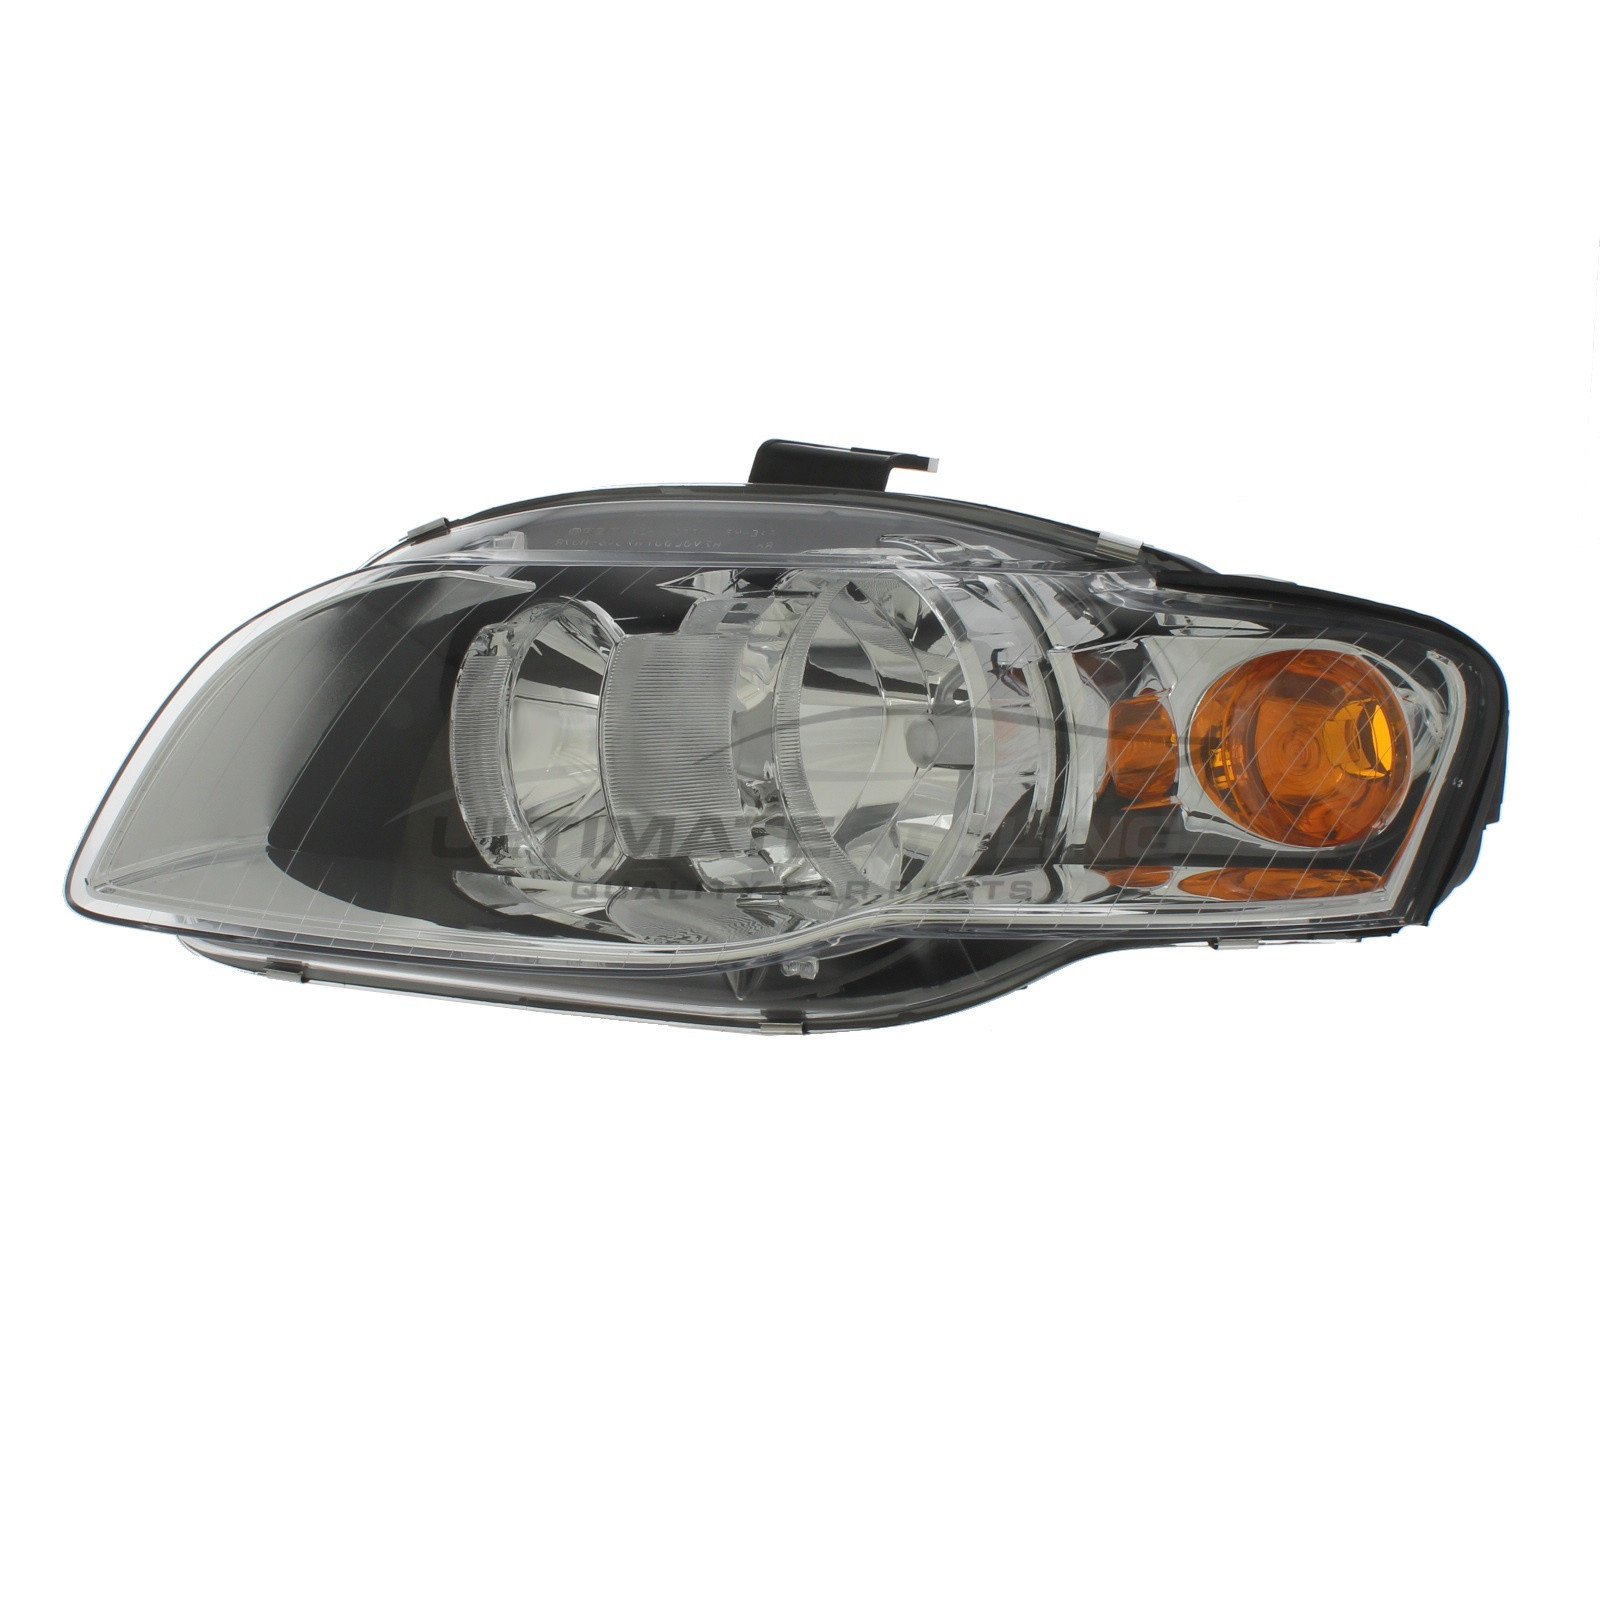 Audi A4 (Saloon & Estate) 2004-2008, A4 (Cabriolet) 2006-2010 Halogen, Electric With Motor, Chrome Headlight / Headlamp Including Amber Indicator Passengers Side (LH)